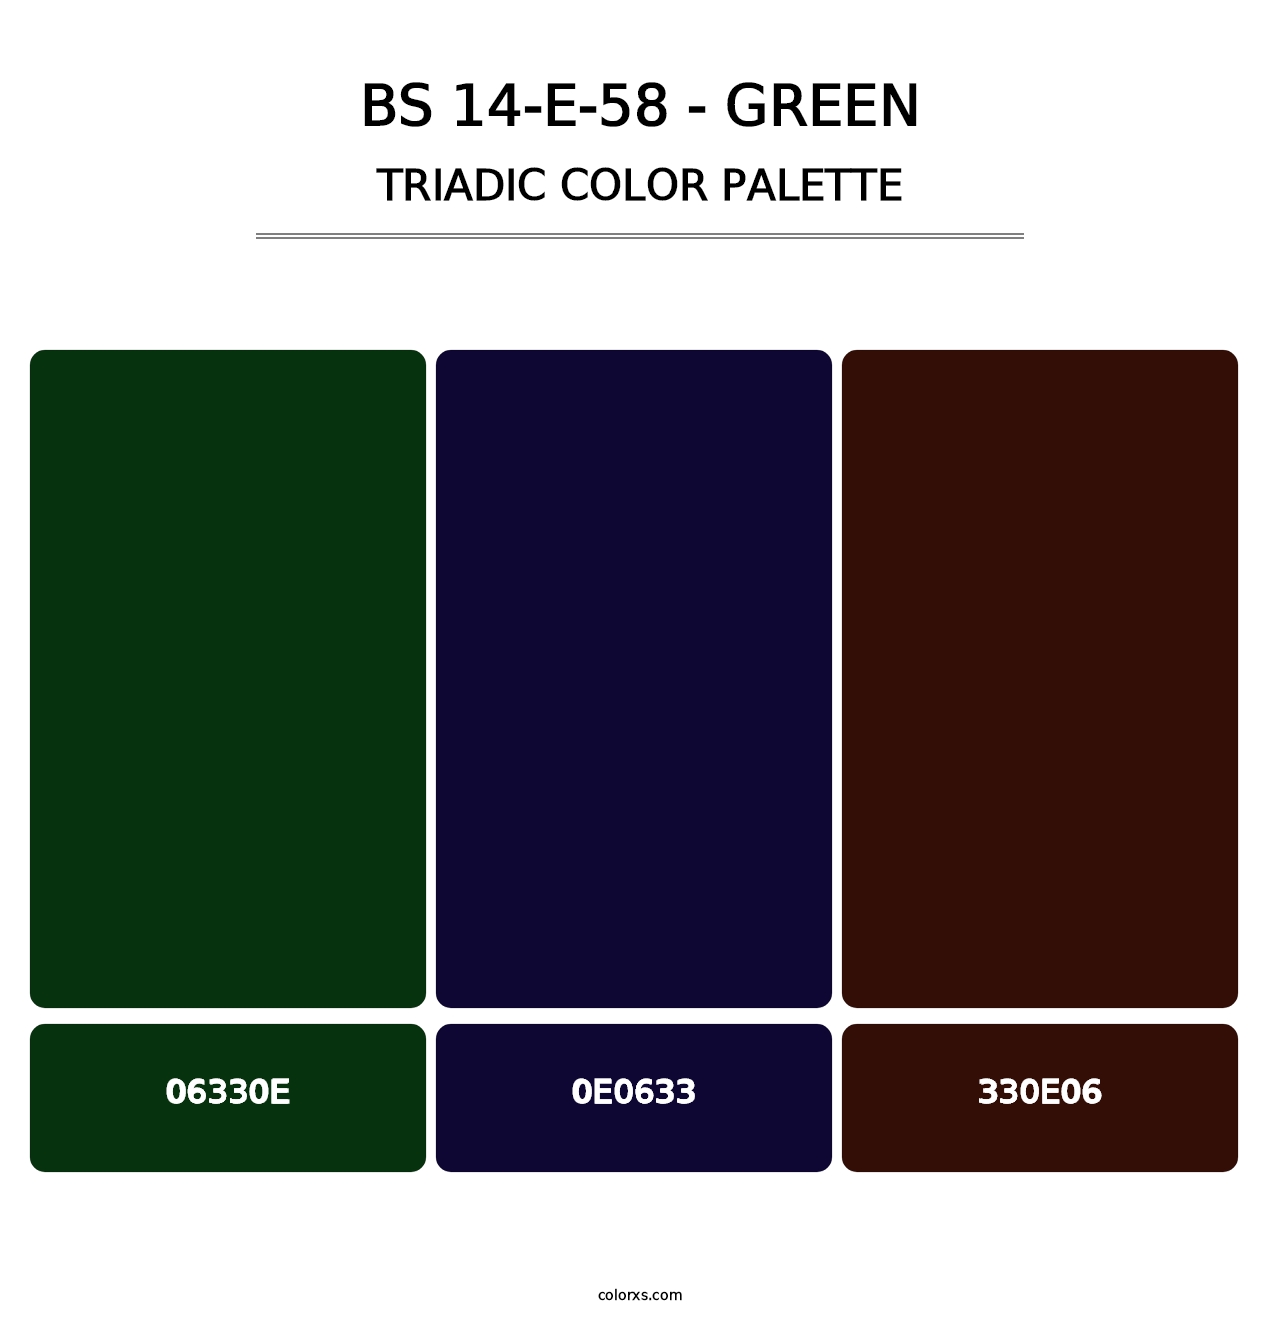 BS 14-E-58 - Green - Triadic Color Palette